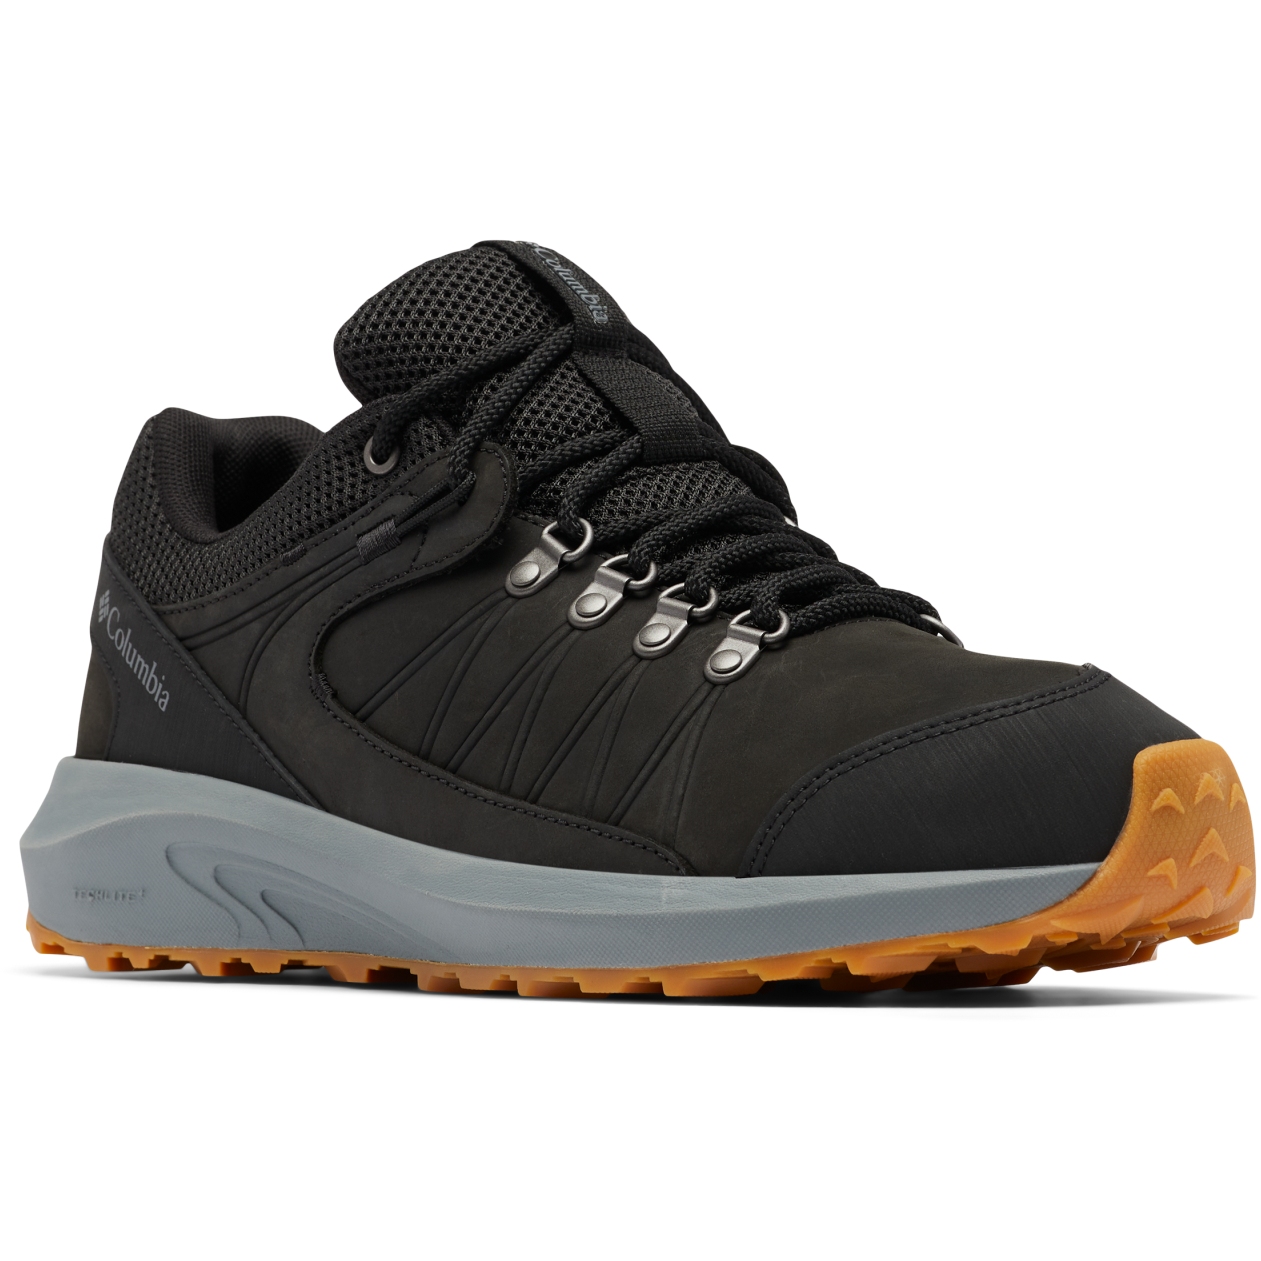 Picture of Columbia Trailstorm Crest Waterproof Hiking Shoes - Black, Ti Grey Steel